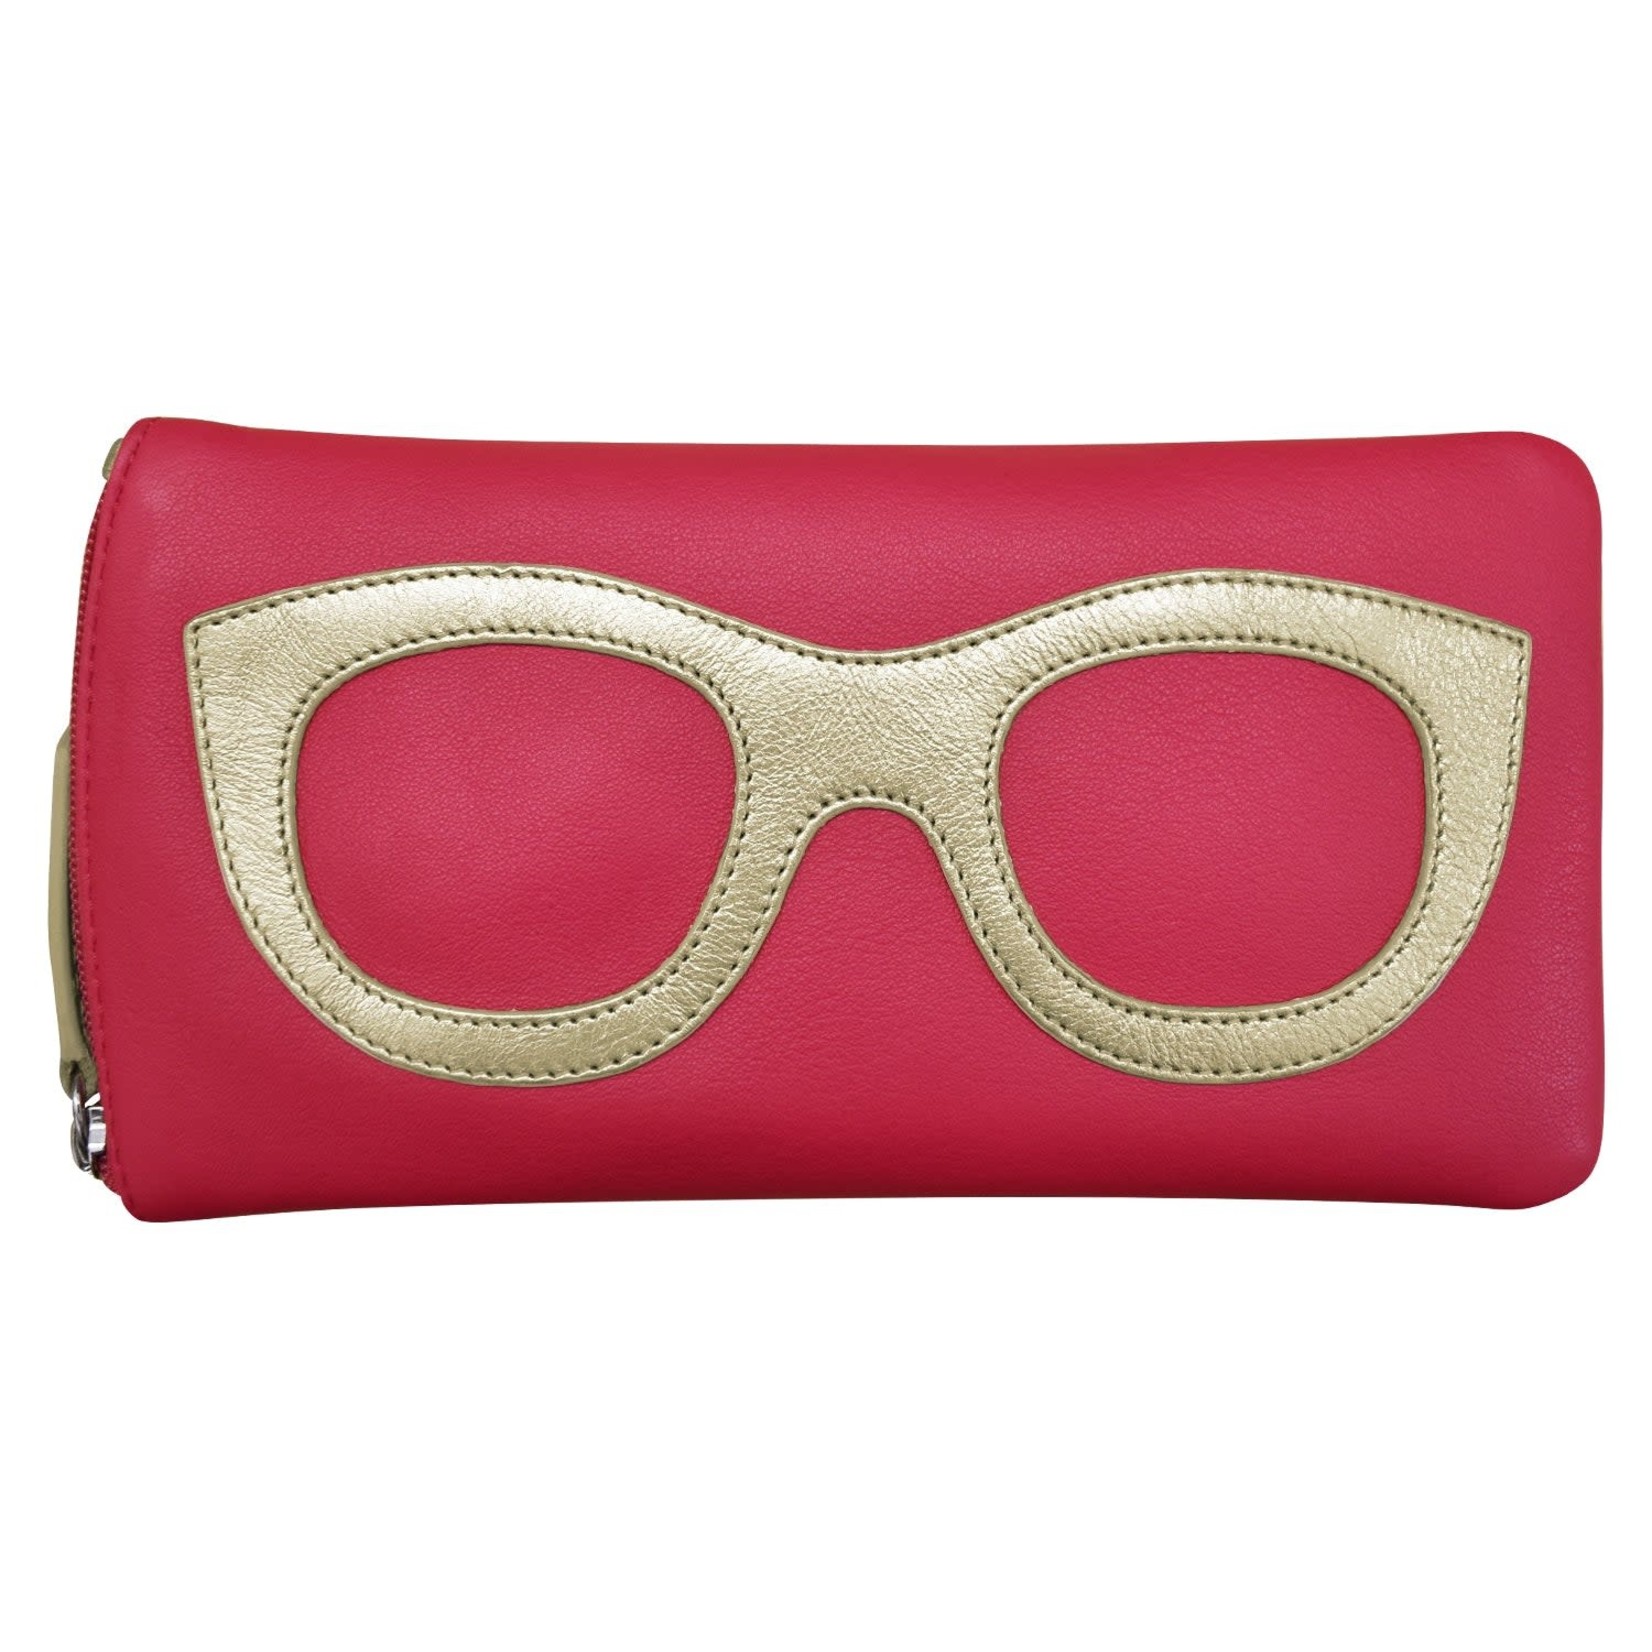 Leather Handbags and Accessories 6462 Indian Pink/Light Gold - Leather Eyeglass Case